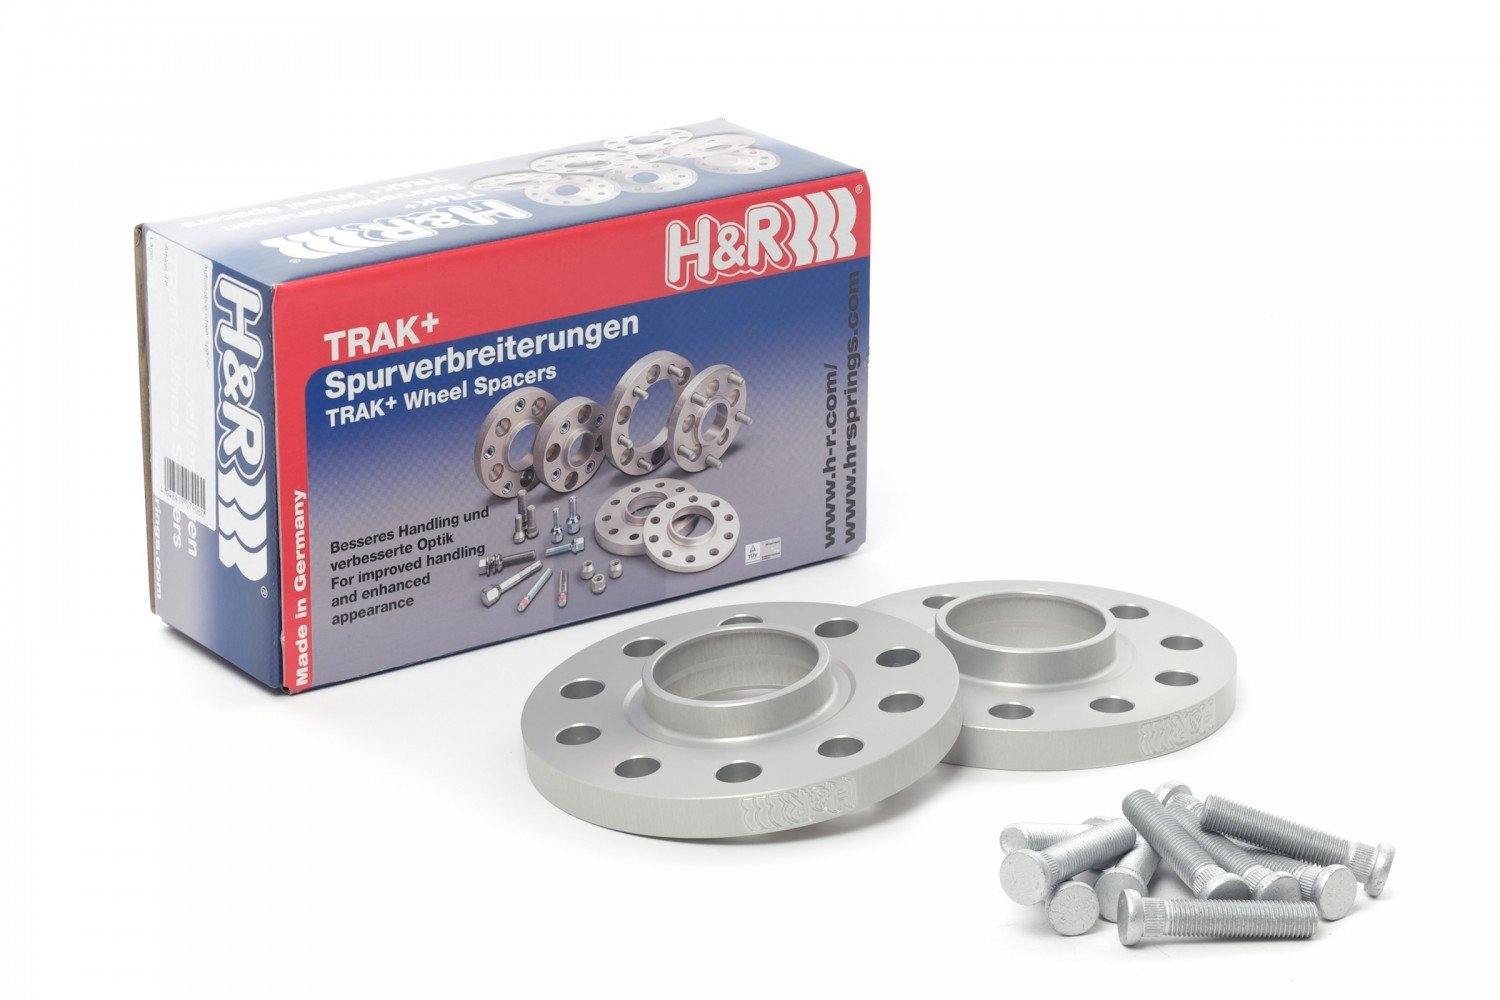 Abarth 124 Wheel Spacer Set 2x18 mm Incl. Wheel Nuts - Abarth Tuning